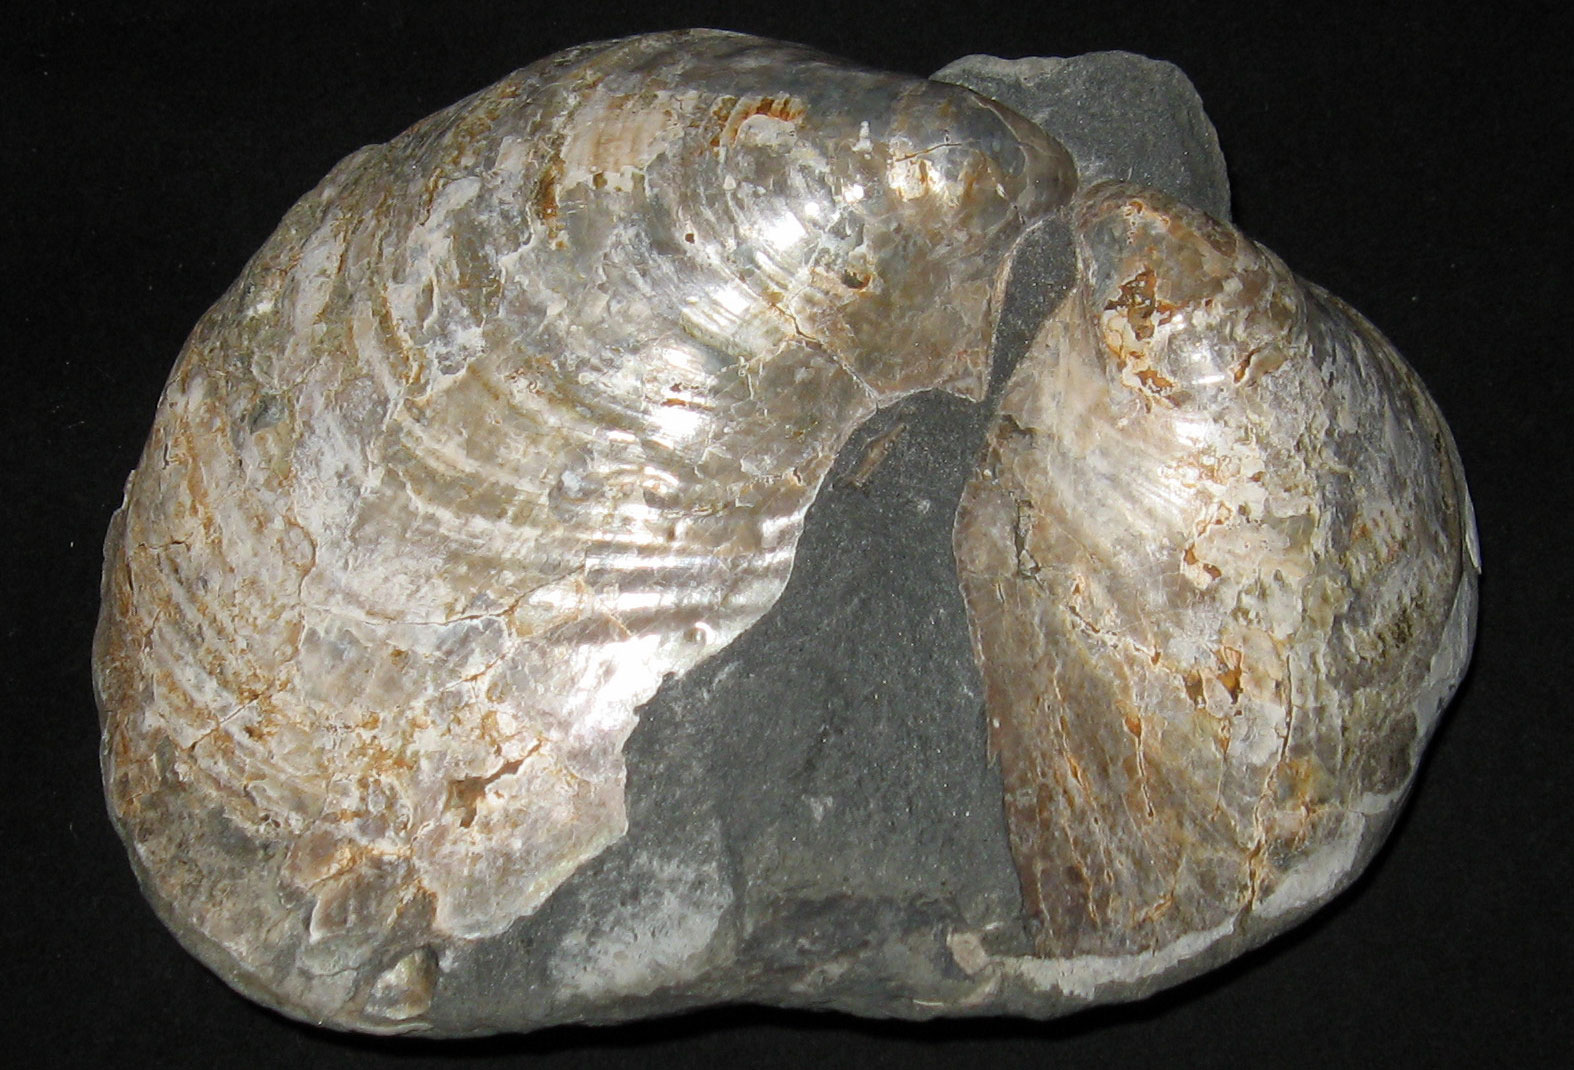 Photograph of a large fossil bivalve, Inoceramus, from Little Sucia Island, Washington. The bilvalve has both valves preserved and the hinge can be seen. The shell is off-shite and shiny.